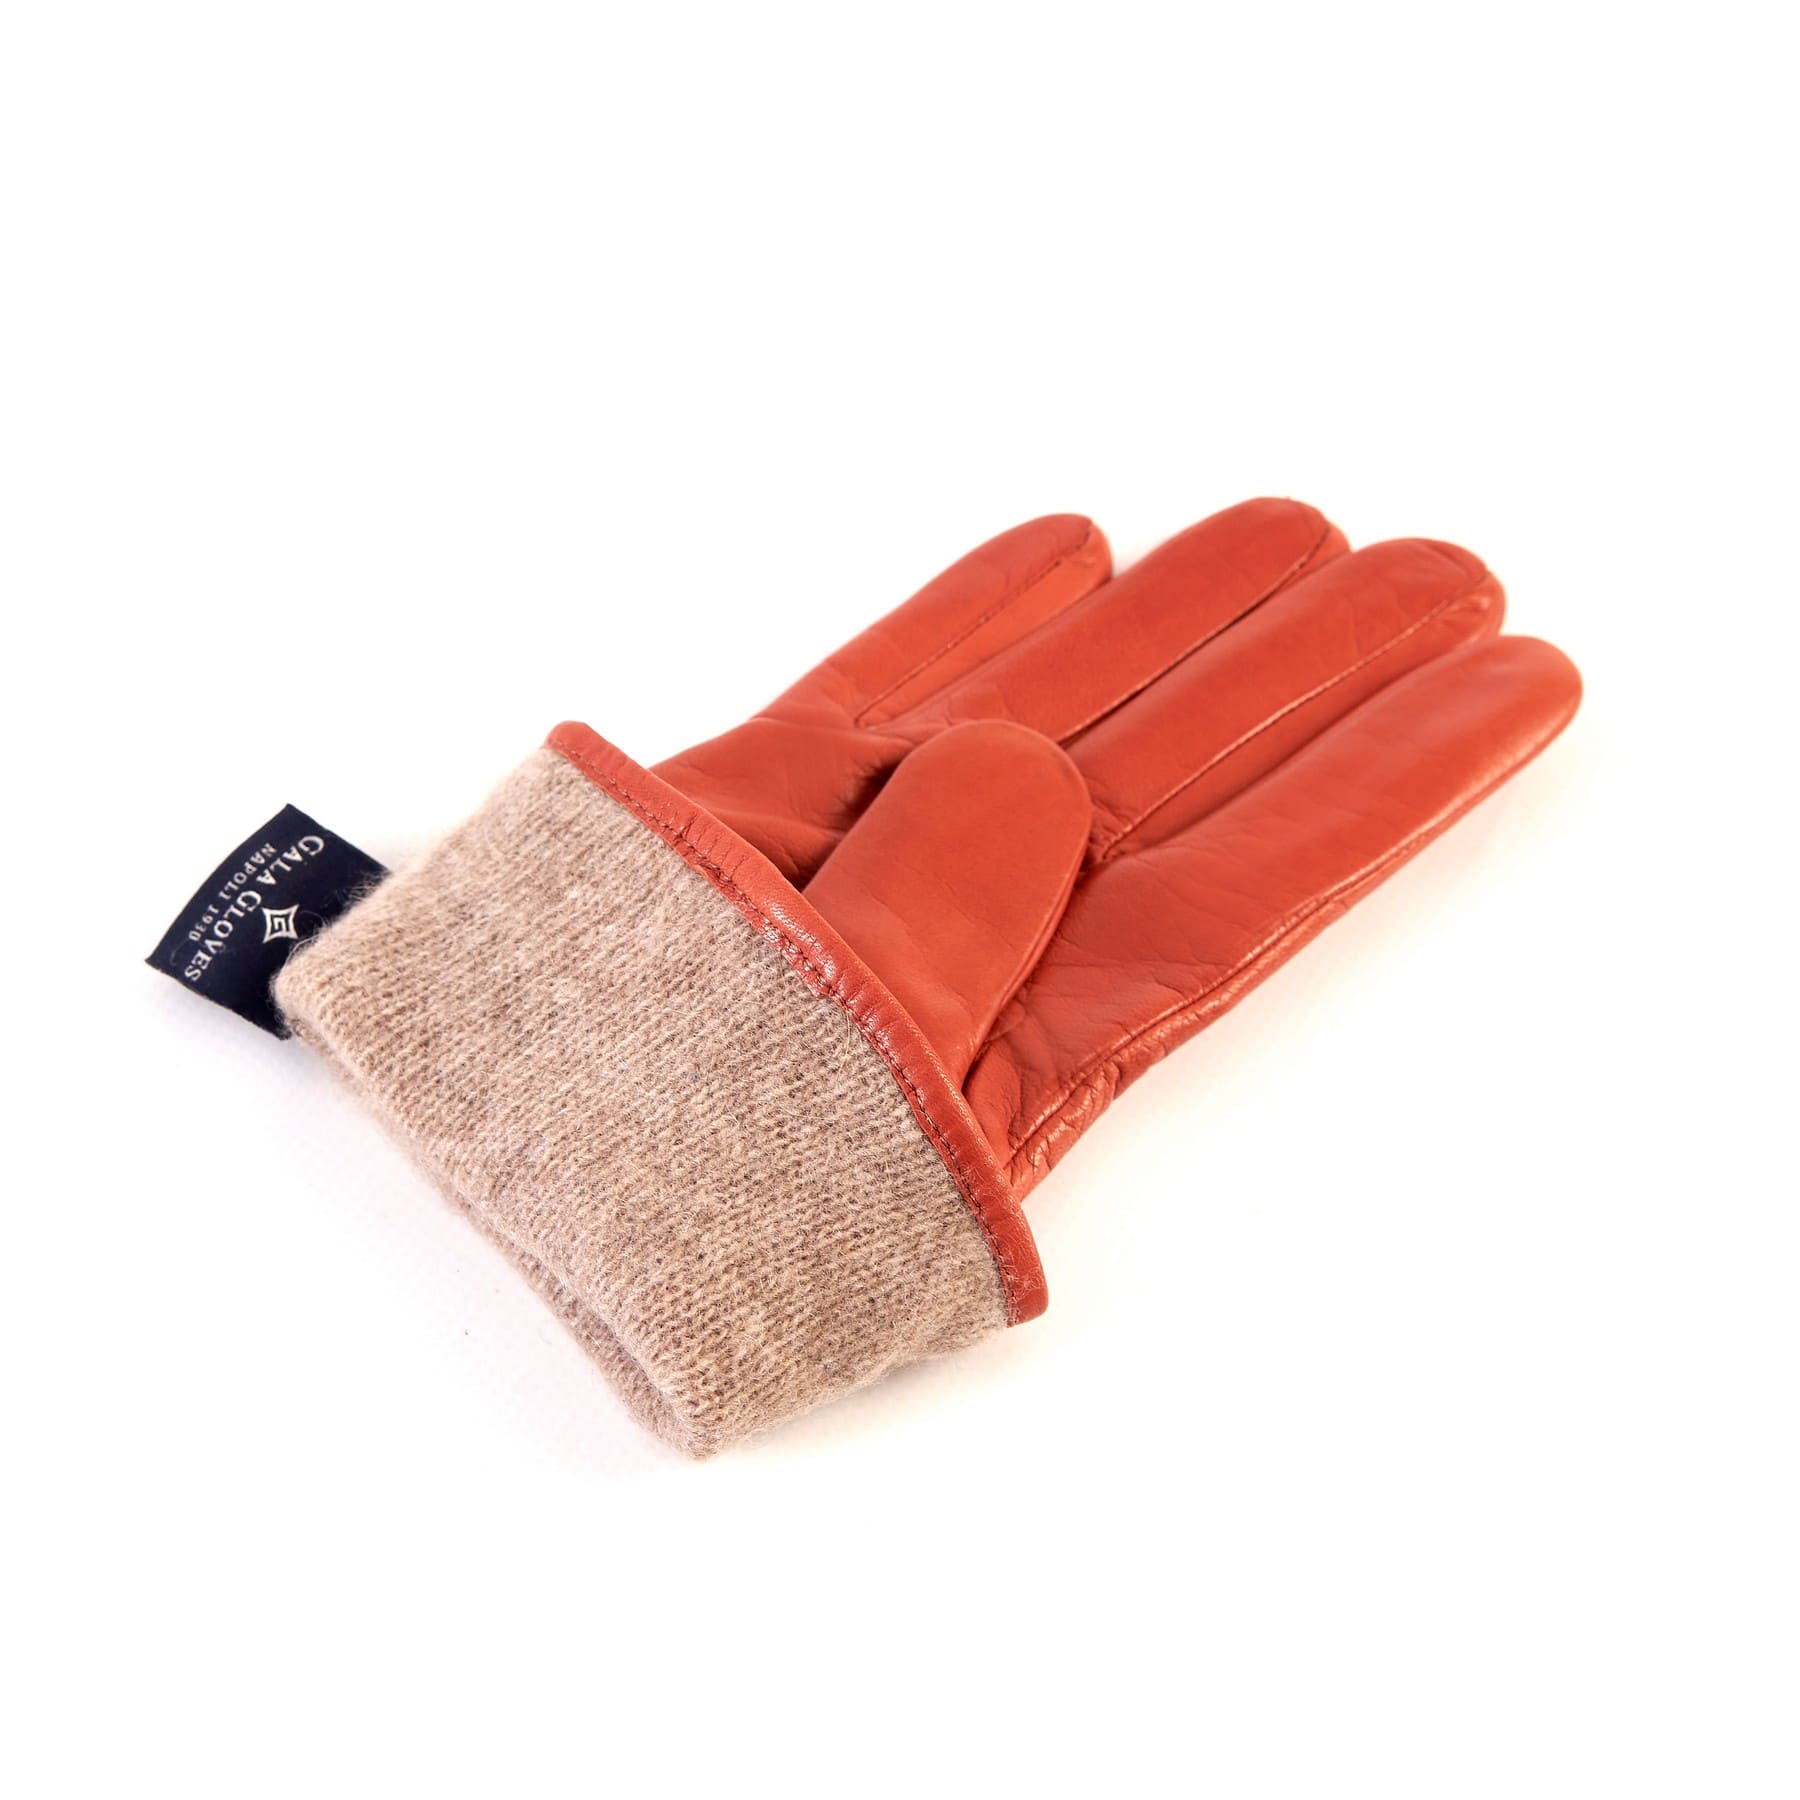 Women's orange nappa leather gloves with suede panel insert on top cashmere lined